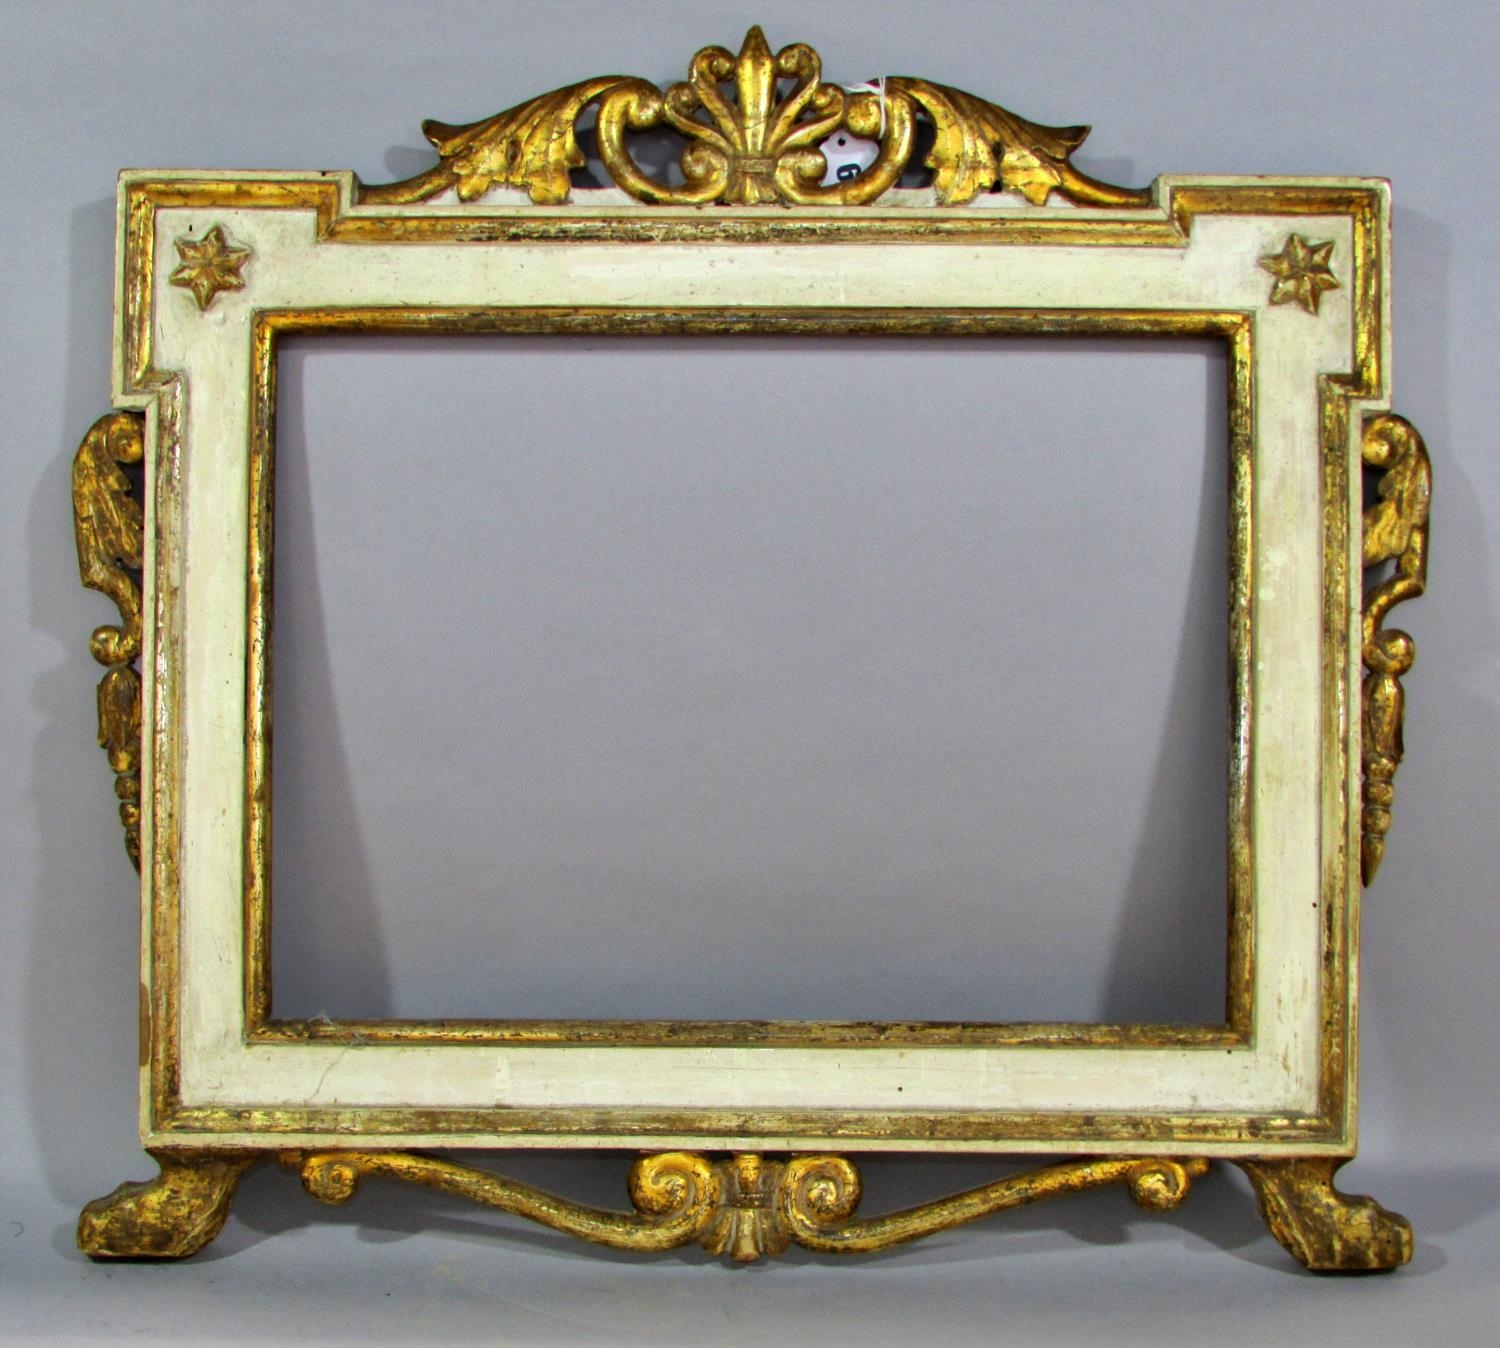 A 19th century continental carved and painted wooden frame, with pierced scrolling surmount, and